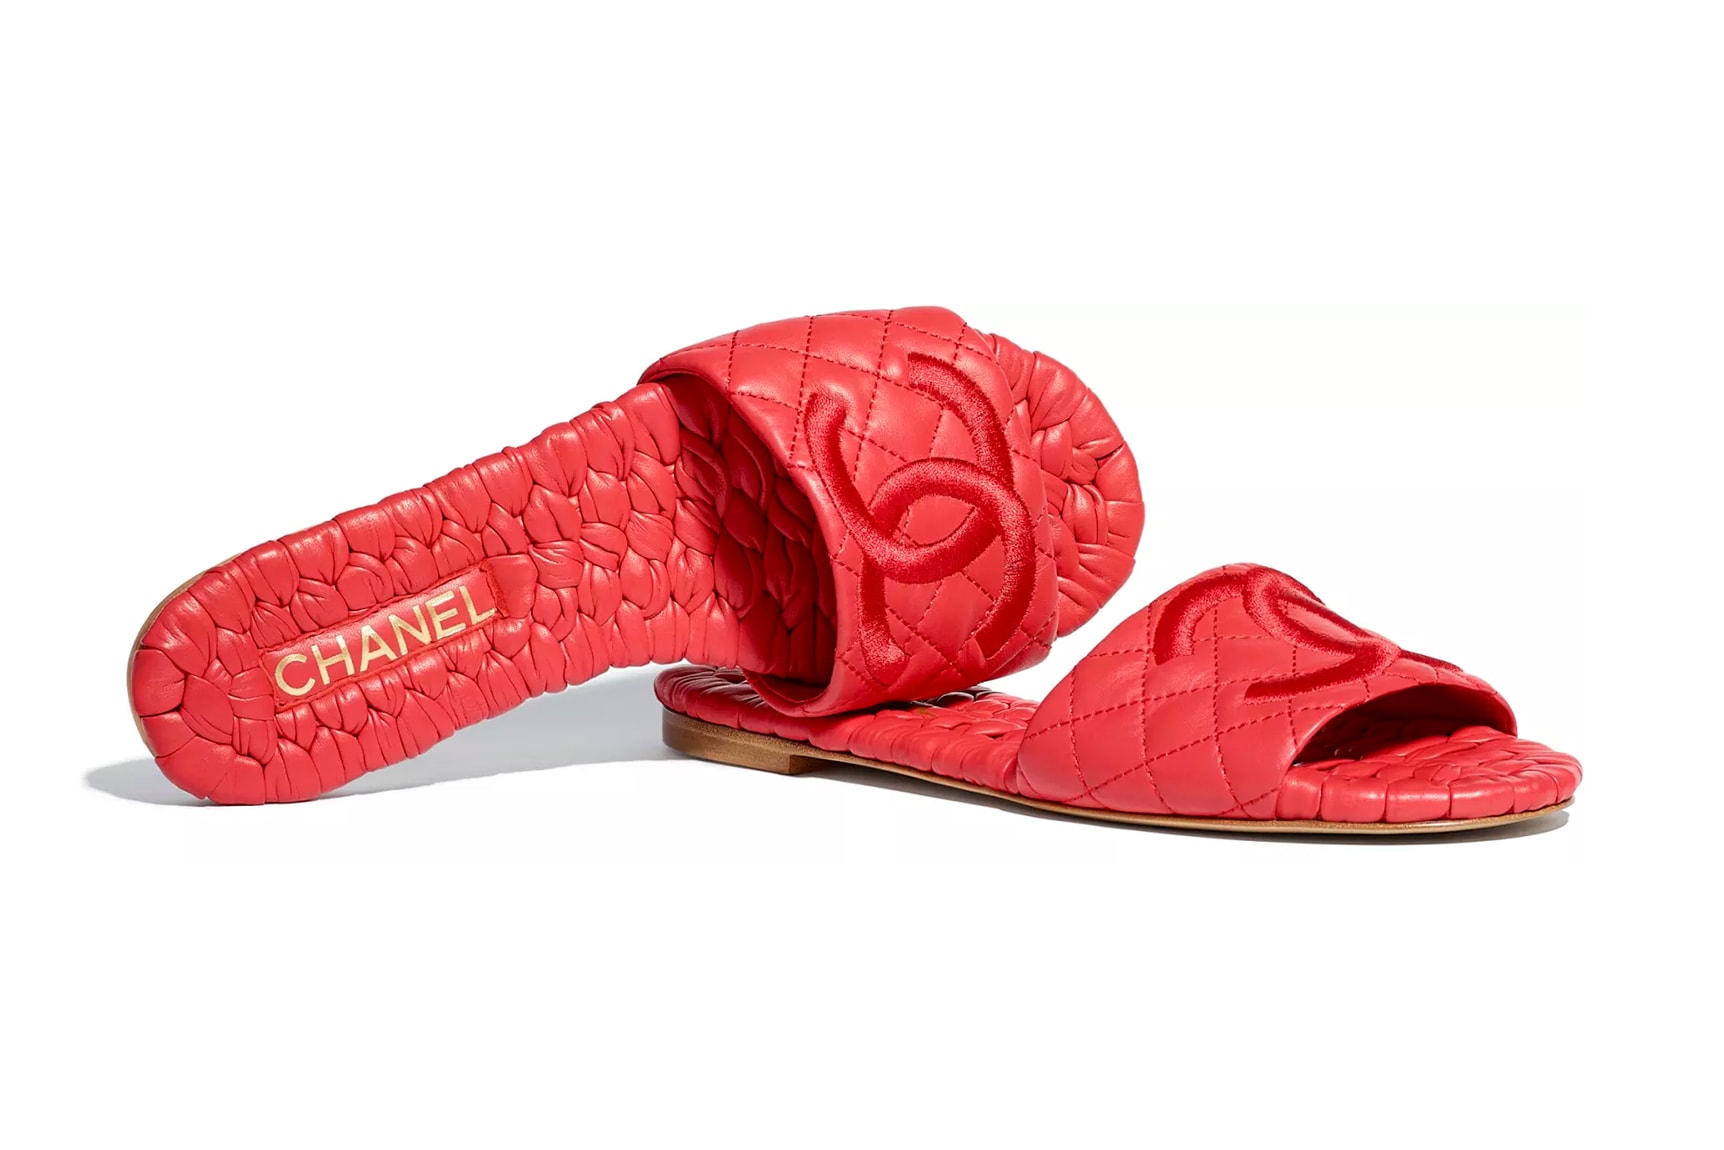 Chanel Releases Quilted C Logo Mule Slides